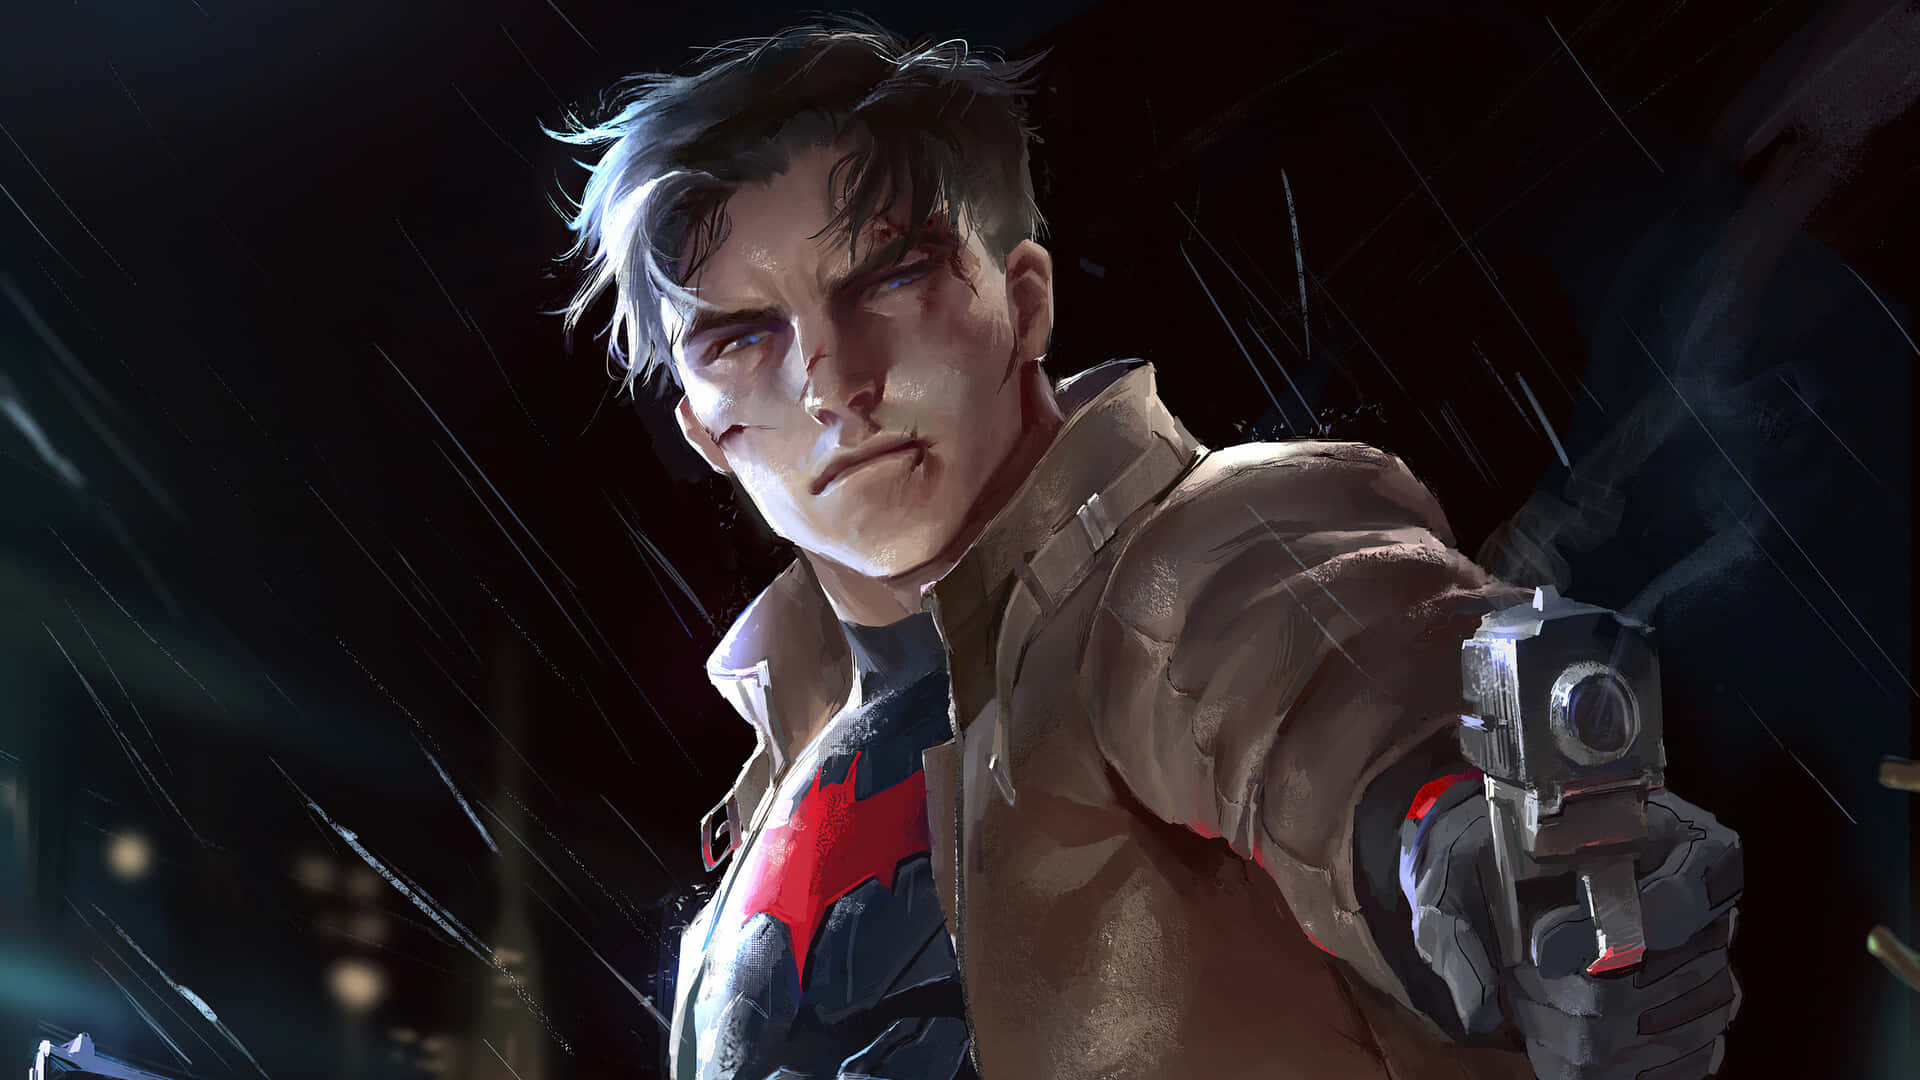 Out for a battle to survive, Red Hood is ready to fight.